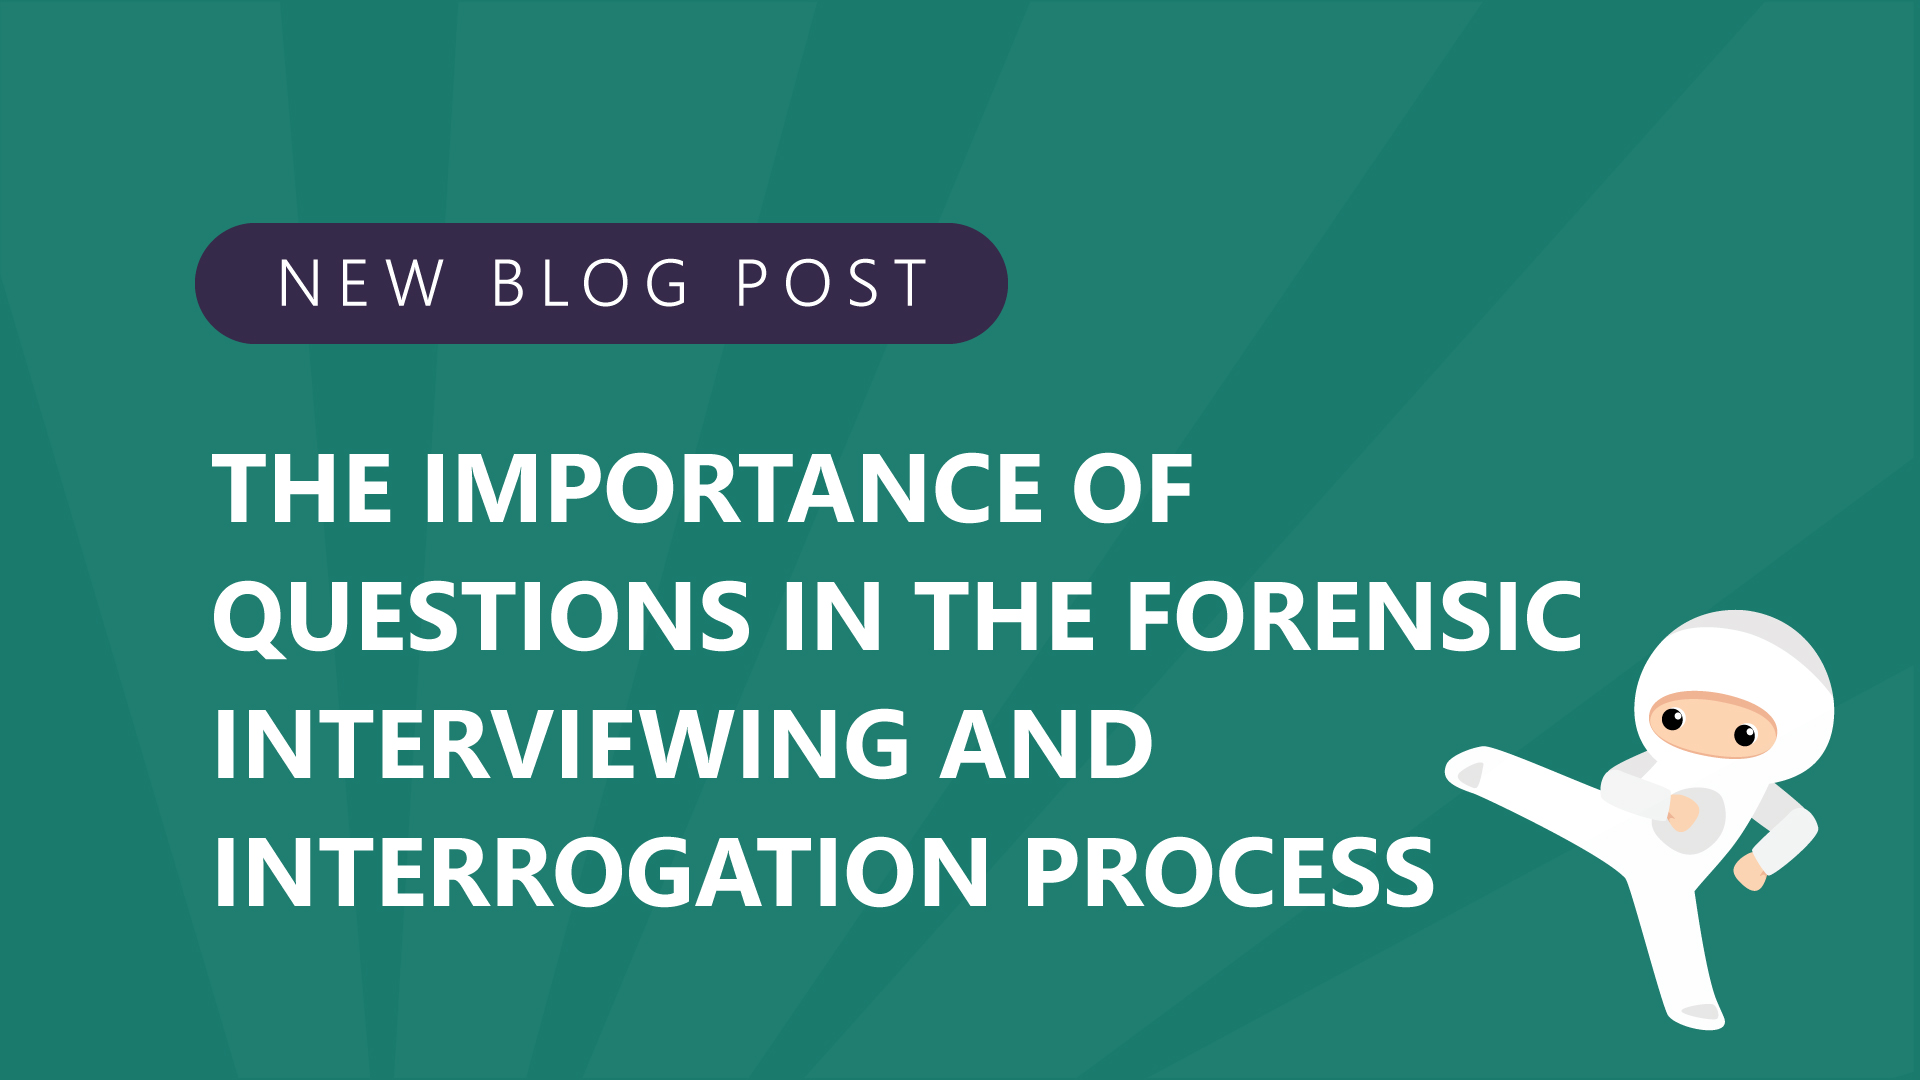 24-The-Importance-of-Questions-in-the-Forensic-Interviewing-and-Interrogation-Process.jpg